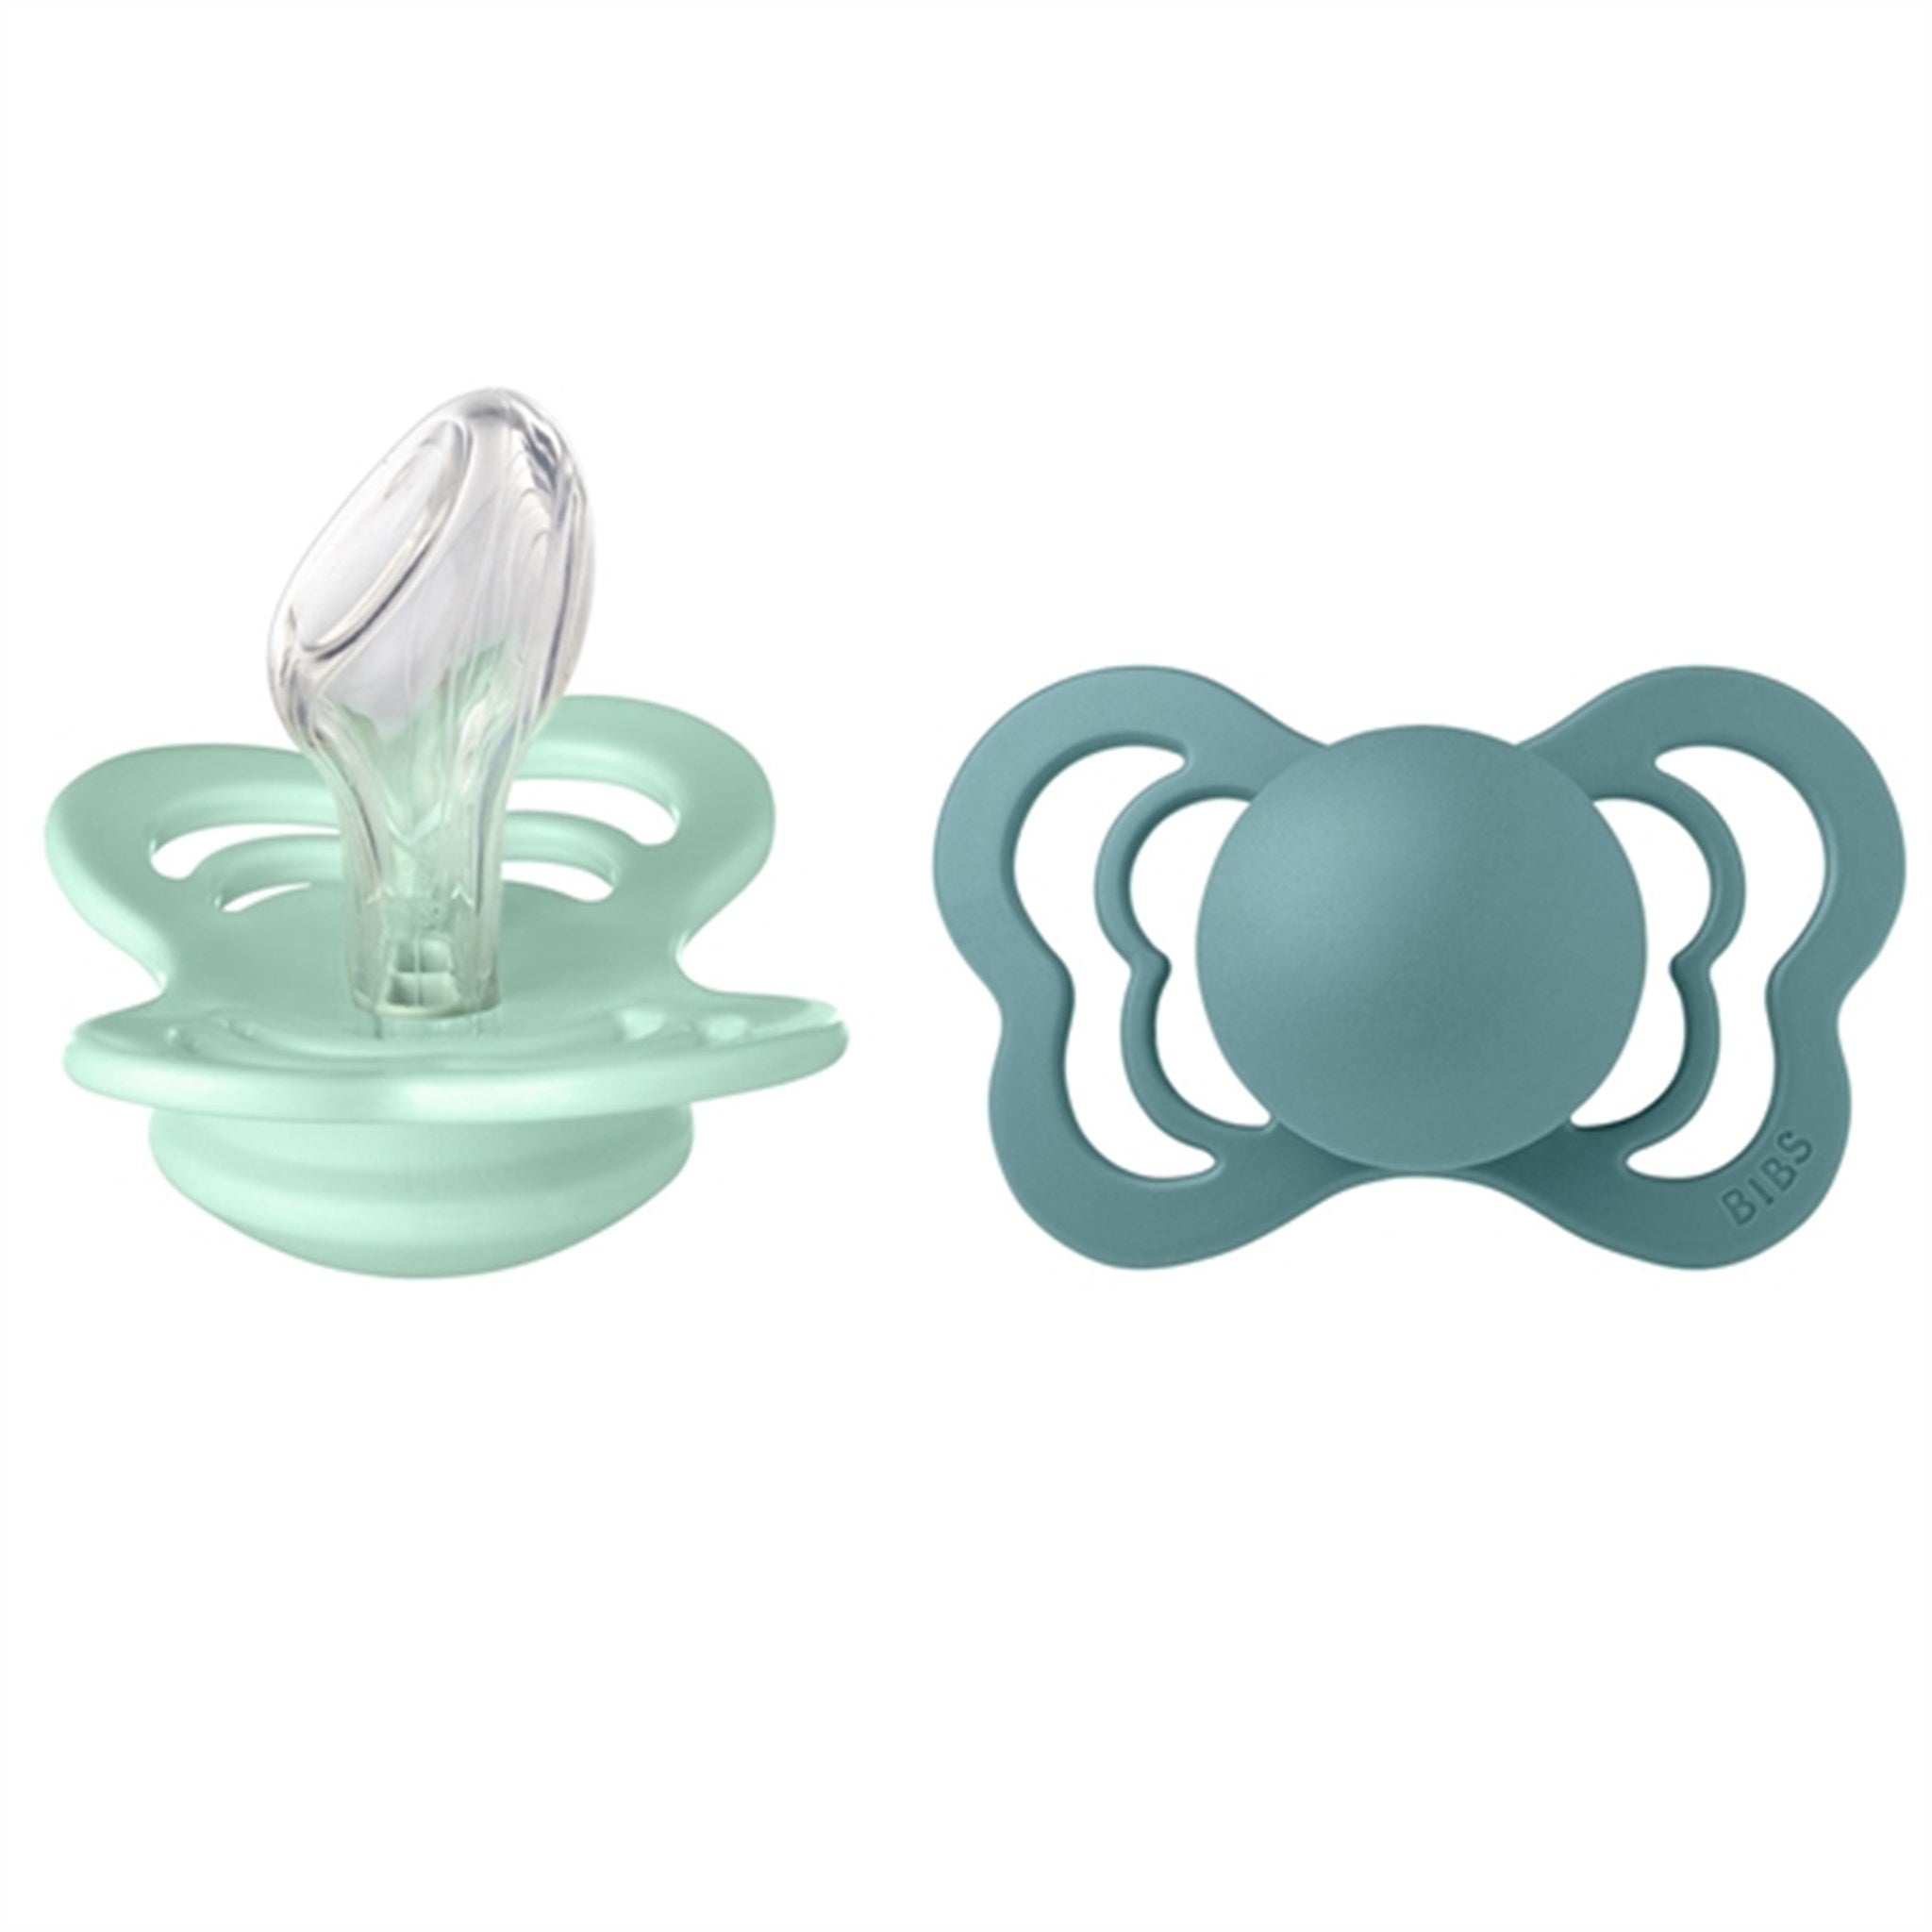 Bibs Couture Silikonnappar 2-pack Anatomisk Mint/Island Sea